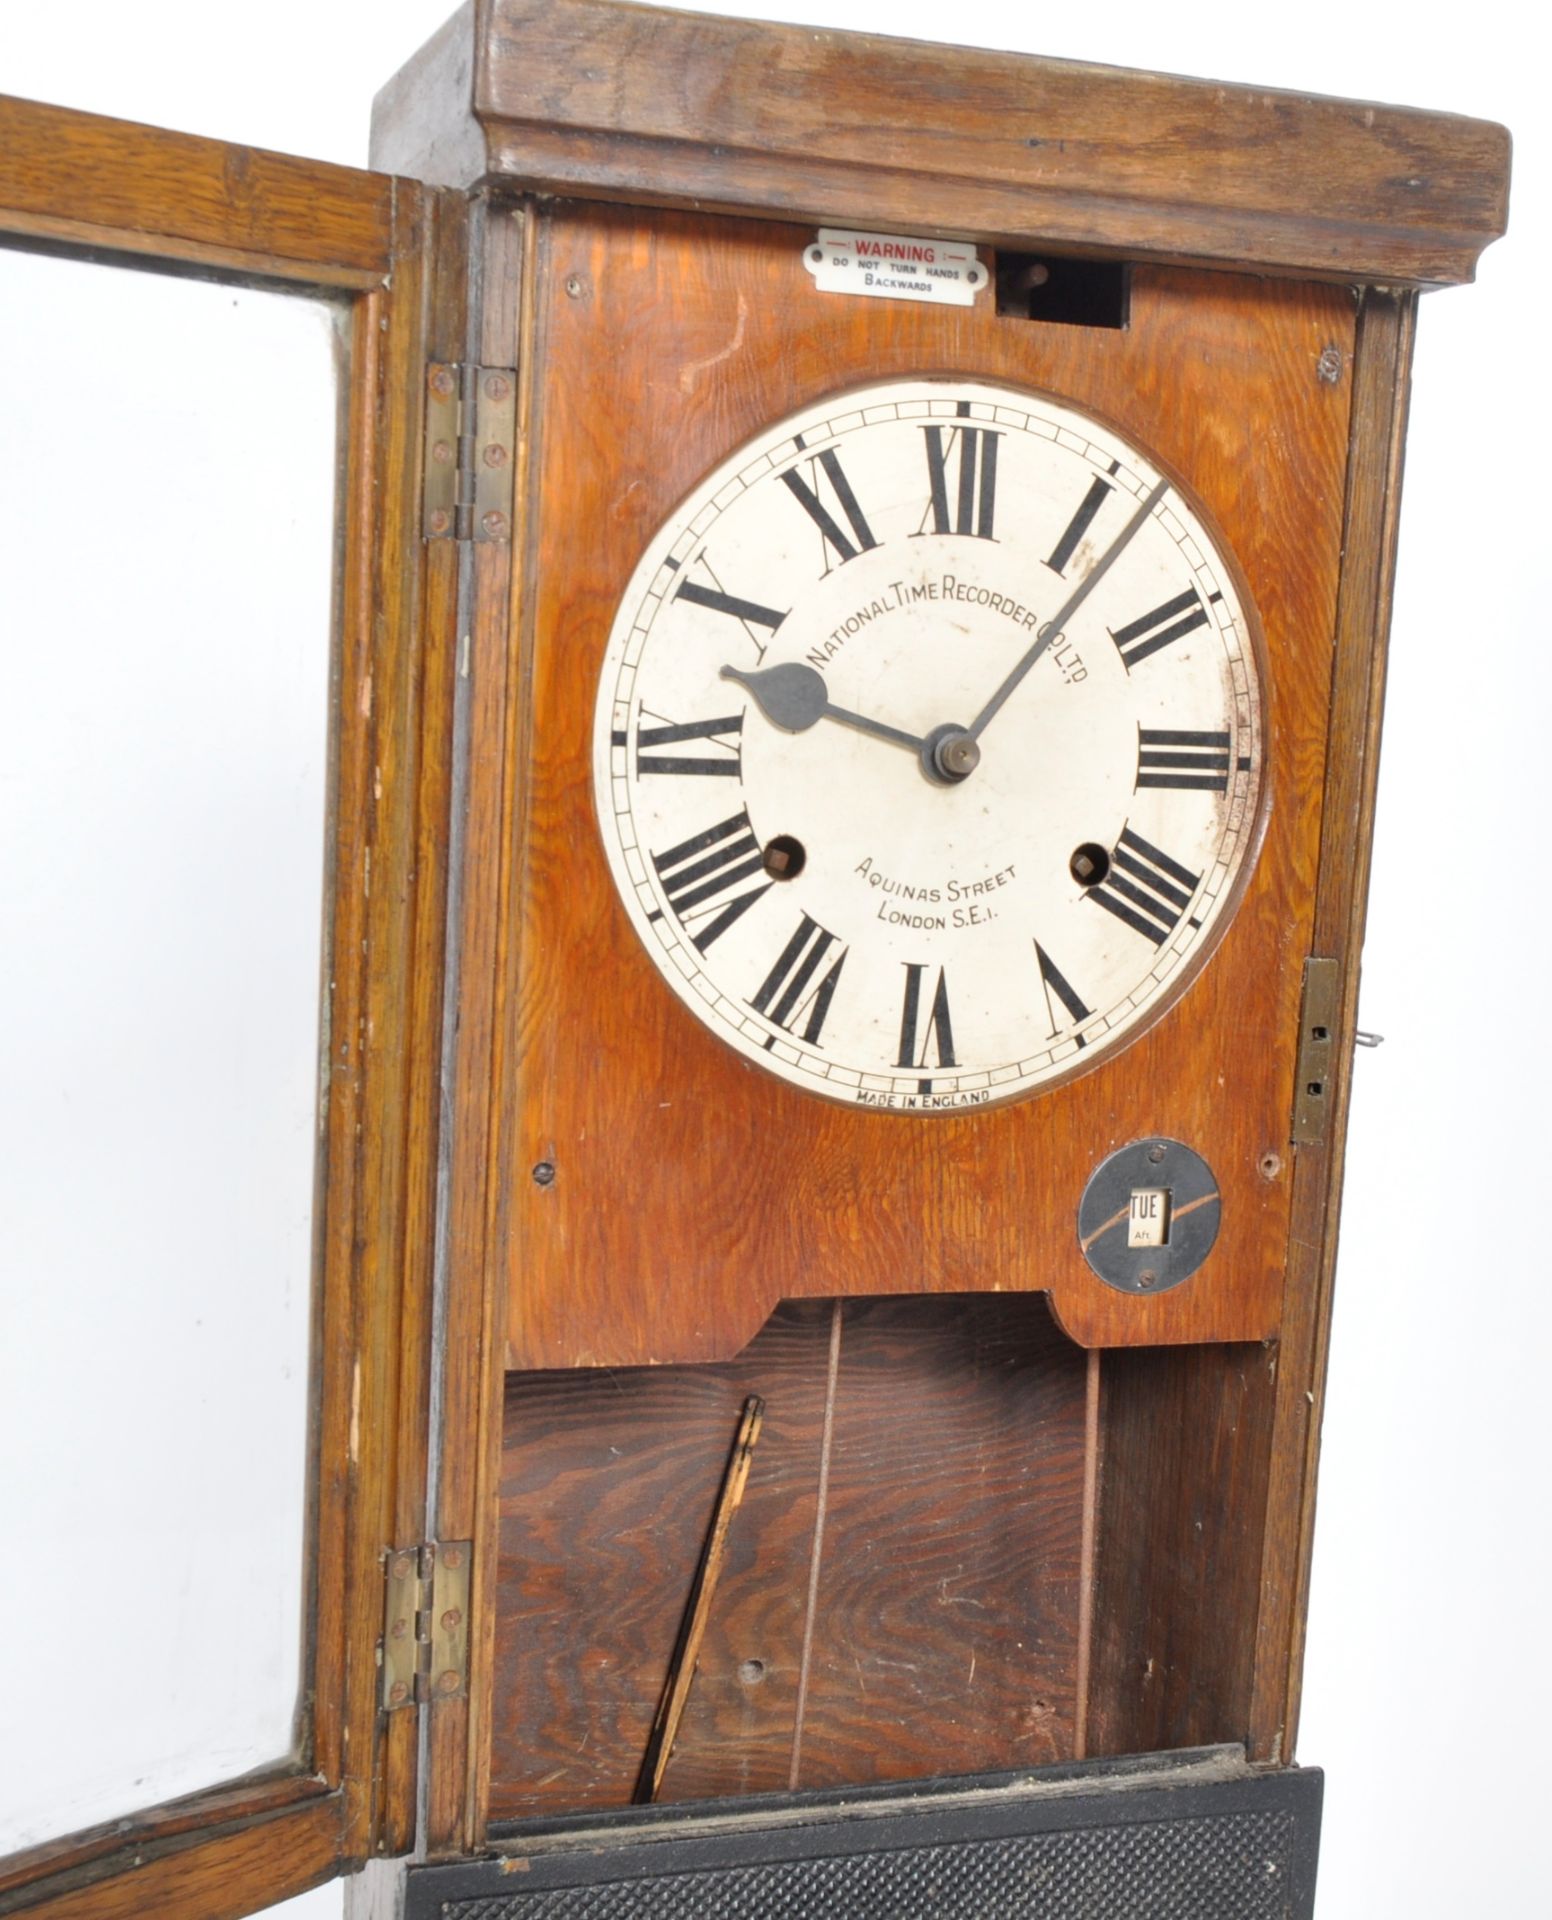 NATIONAL TIME RECORDER CO LTD - EARLY CLOCKING IN MACHINE - Image 6 of 7